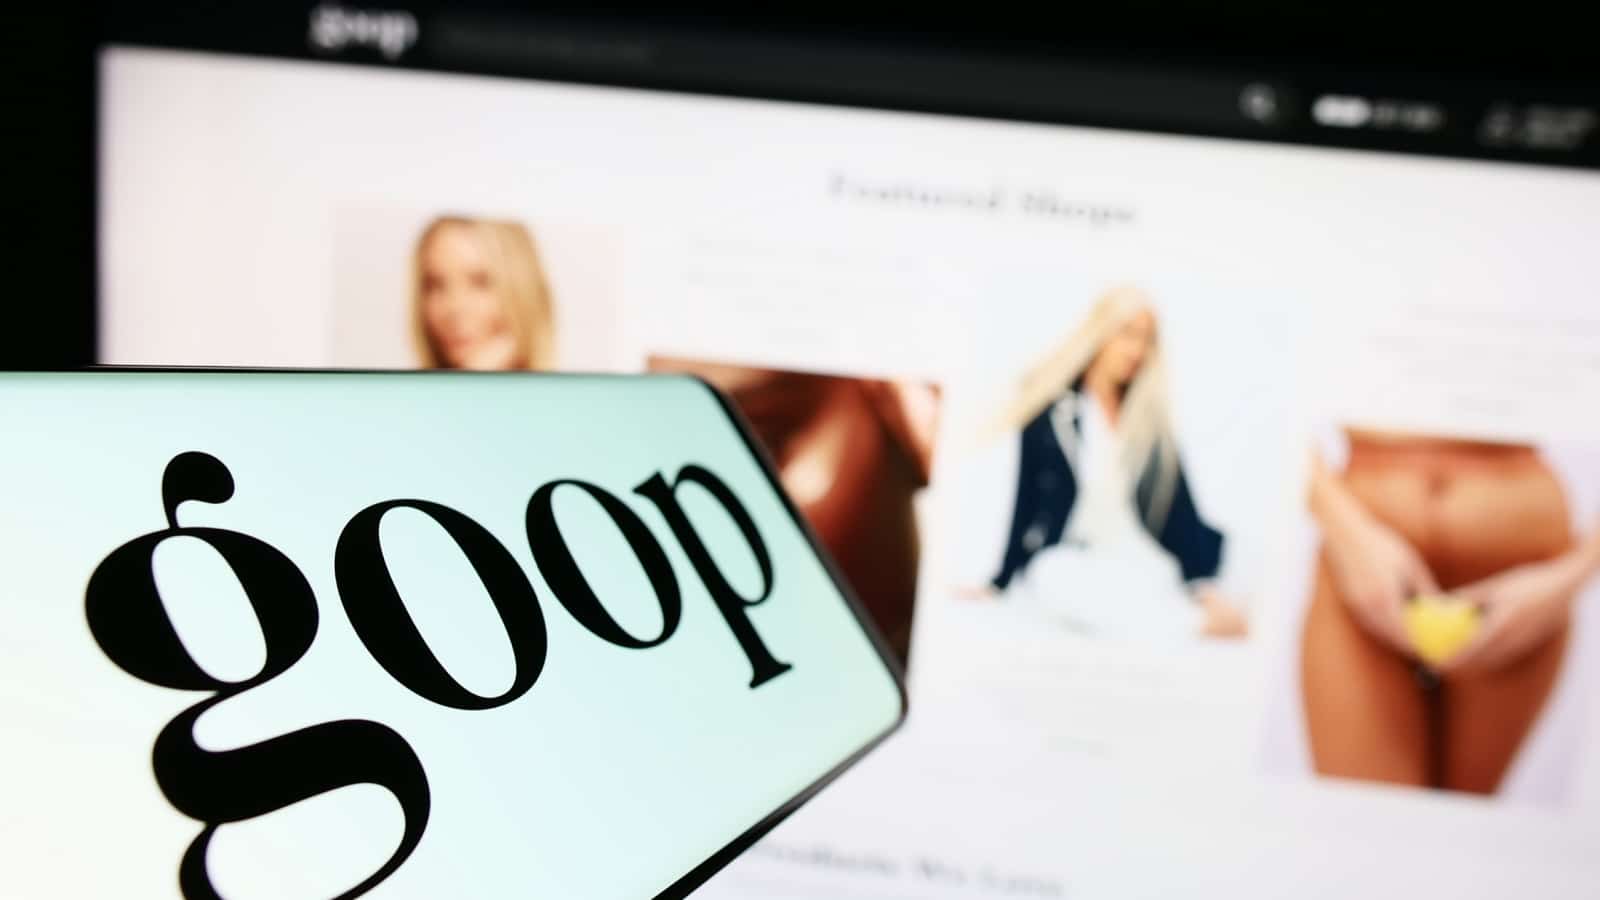 Stuttgart, Germany - 06-28-2023: Mobile phone with logo of US publishing and e-commerce company Goop Inc. on screen in front of website. Focus on center-left of phone display. Unmodified photo.